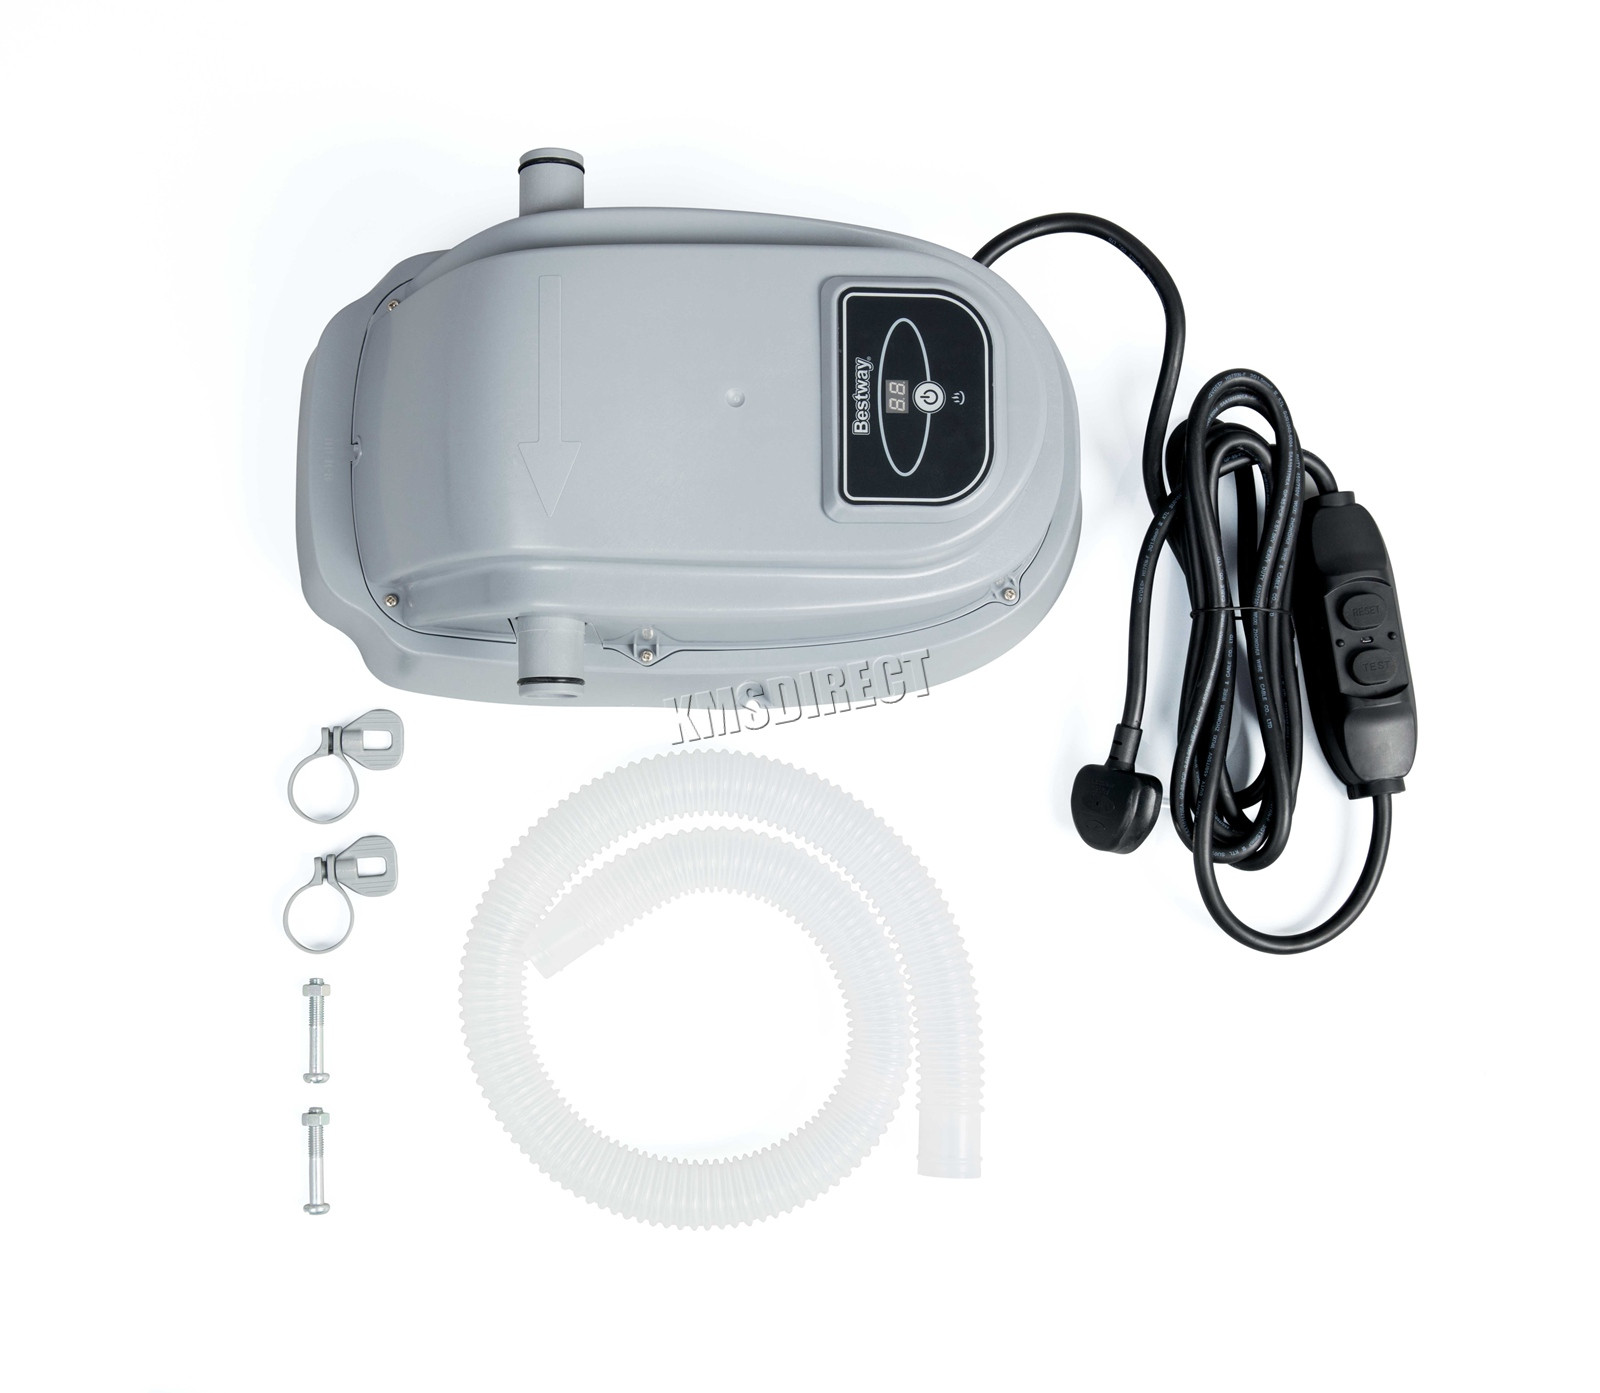 Electric Above Ground Pool Heater
 Bestway Electric Swimming Pool Heater Up to 15FT 2 8KW For